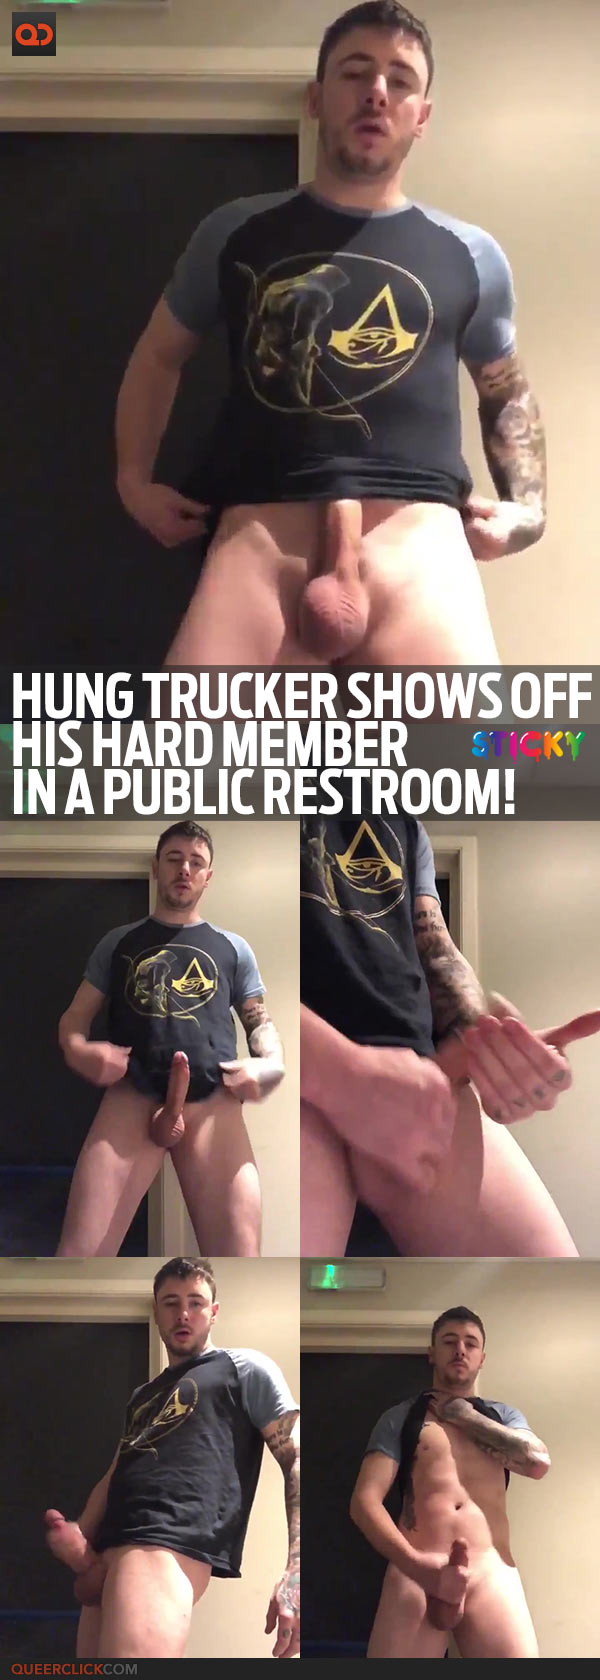 Hung Trucker Shows Off His Hard Member In A Public Restroom!